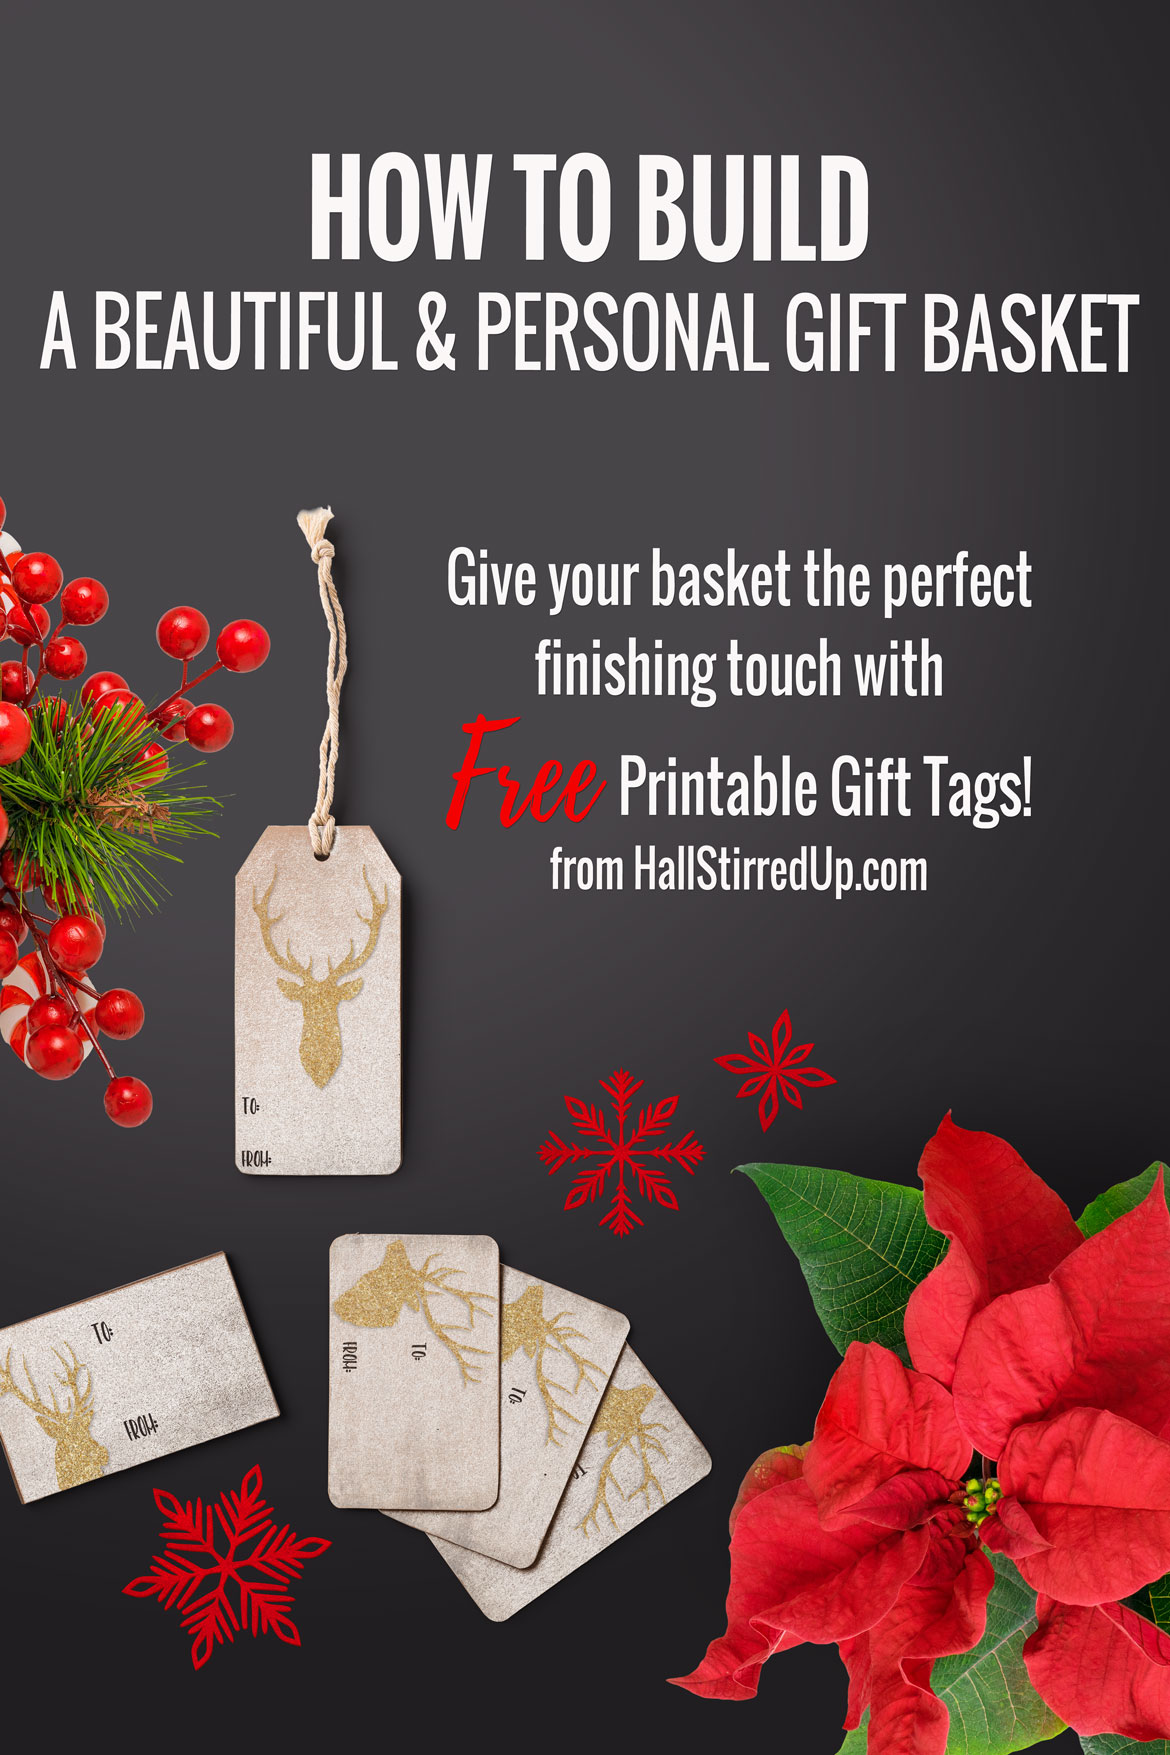 How to create the perfect gift basket includes free printable tags